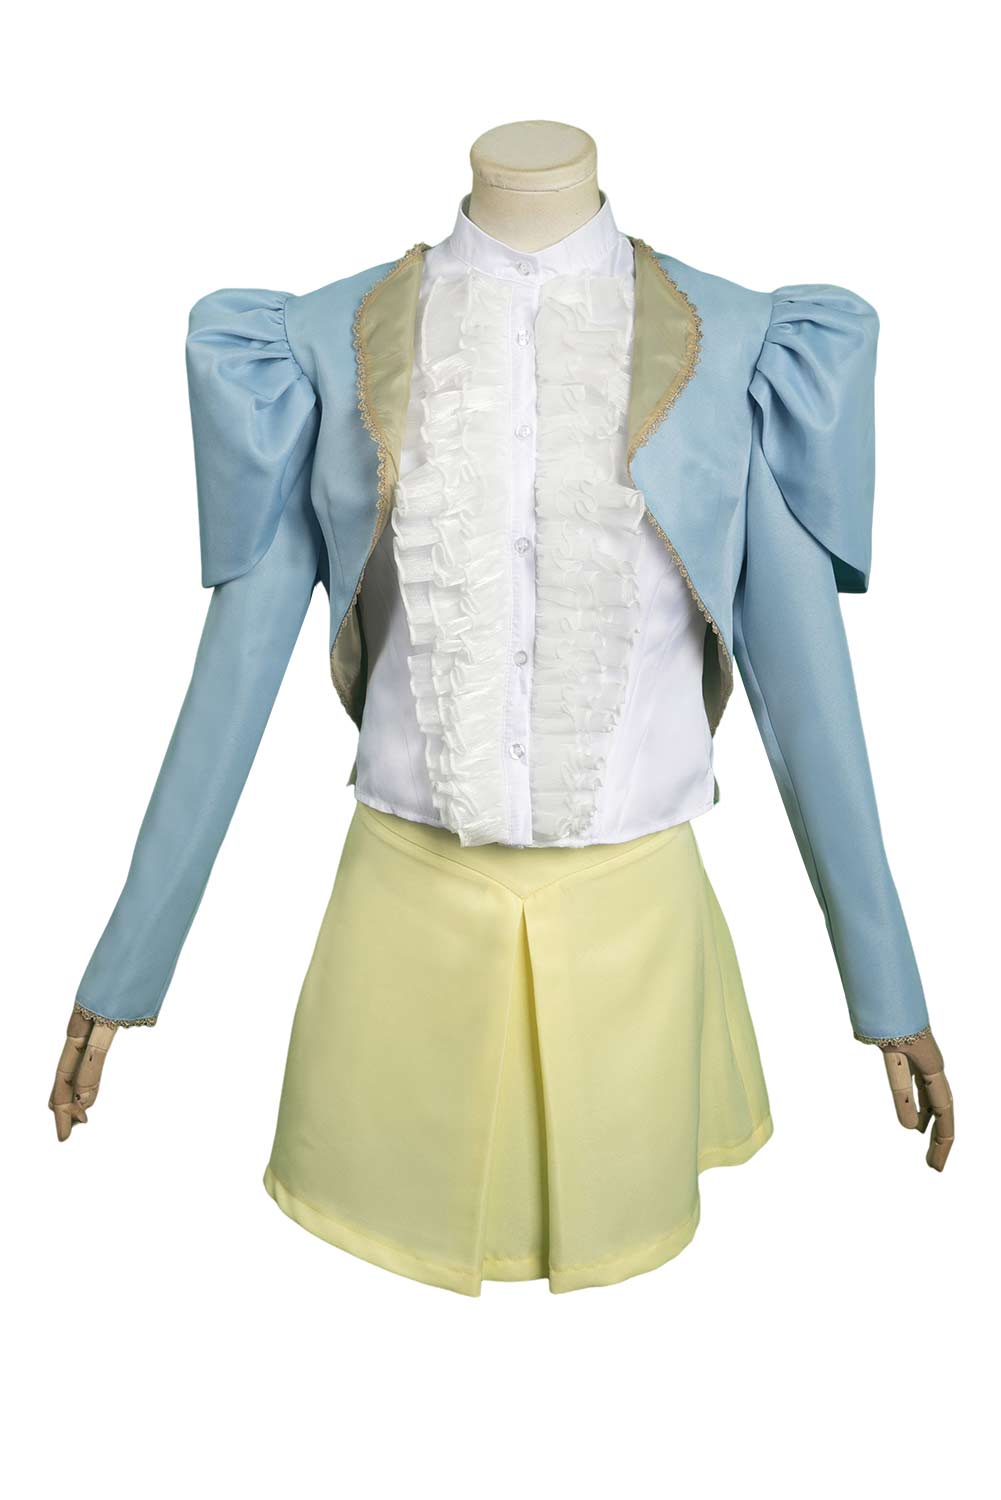 Movie Poor Things Belle Baxter Blue Cosplay Costume Outfits Halloween Carnival Suit